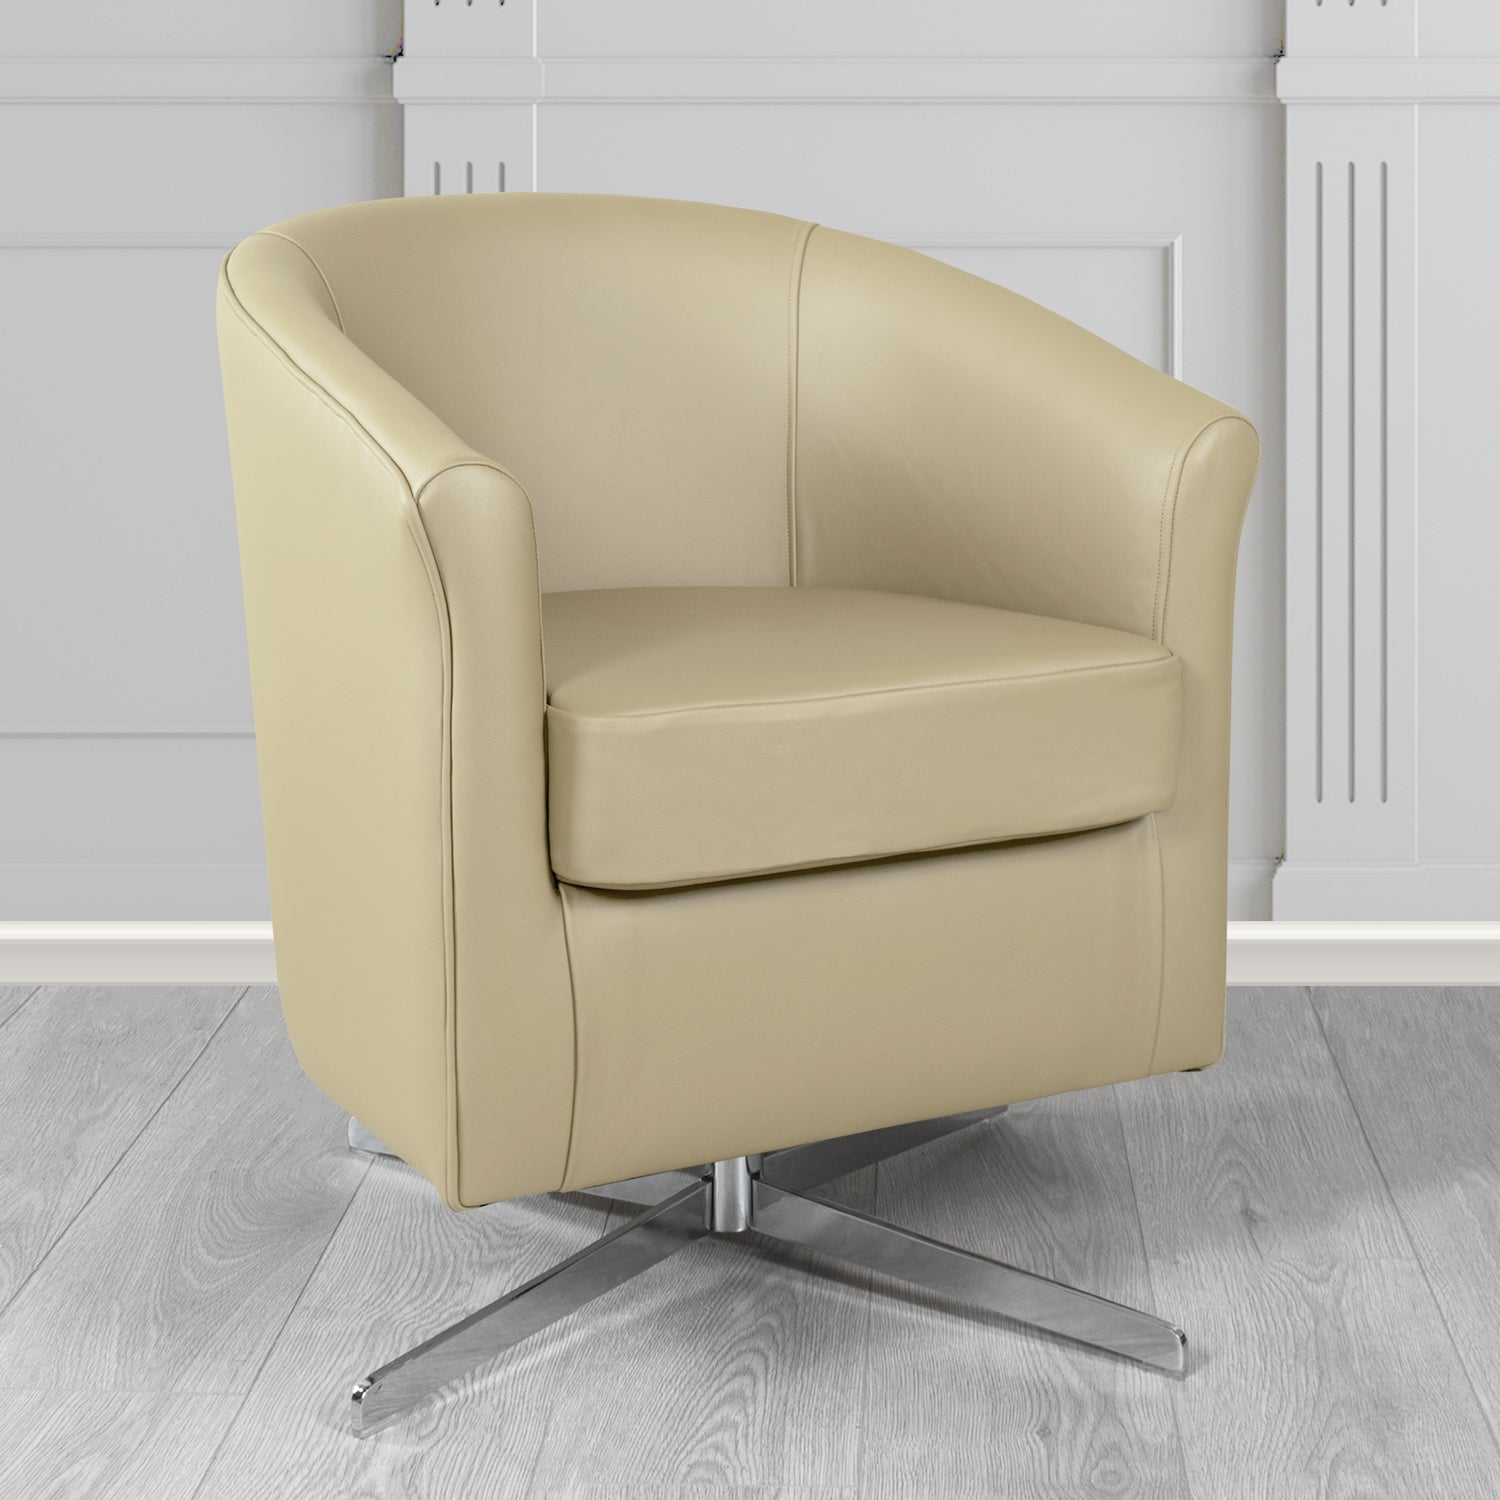 Cannes Swivel Tub Chair in Shelly Pebble Crib 5 Genuine Leather - The Tub Chair Shop